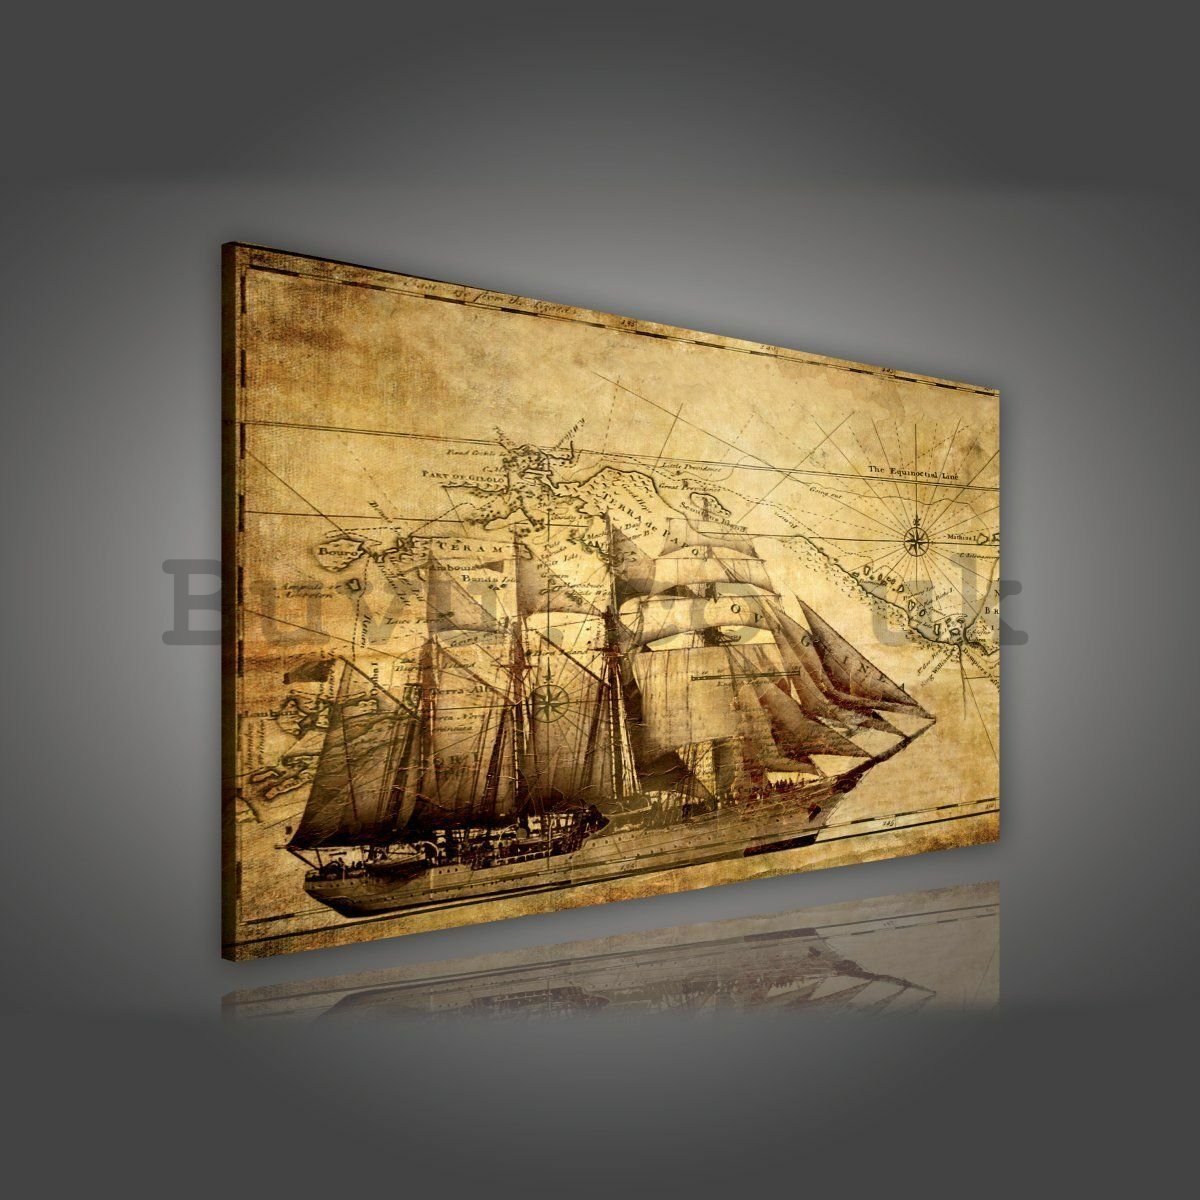 Painting on canvas: Ship (1) - 80x60 cm